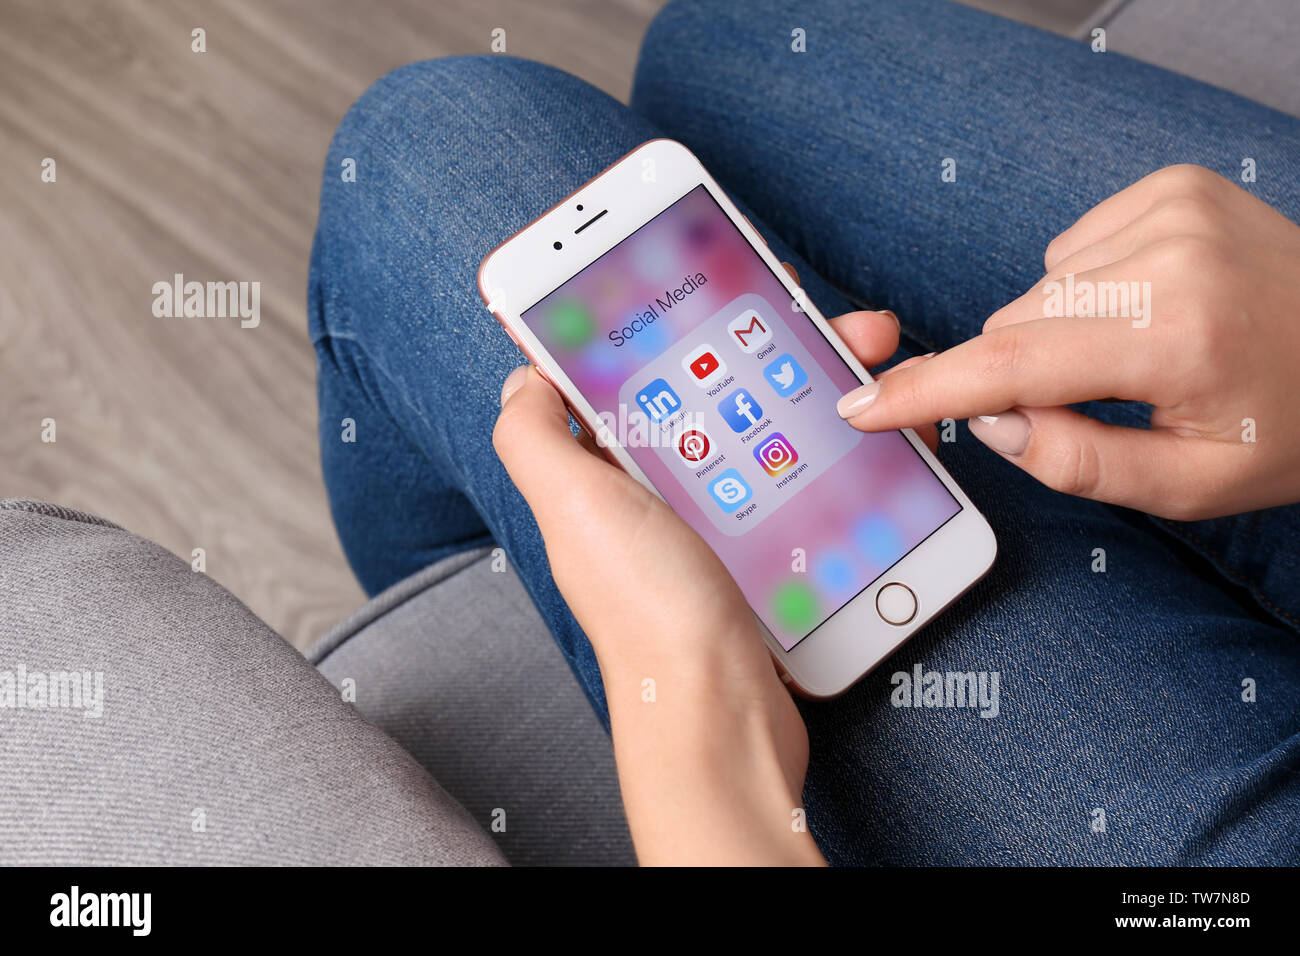 KIEV, UKRAINE - OCTOBER 02, 2017: Woman holding rose gold iPhone 6S with social media icons on screen Stock Photo